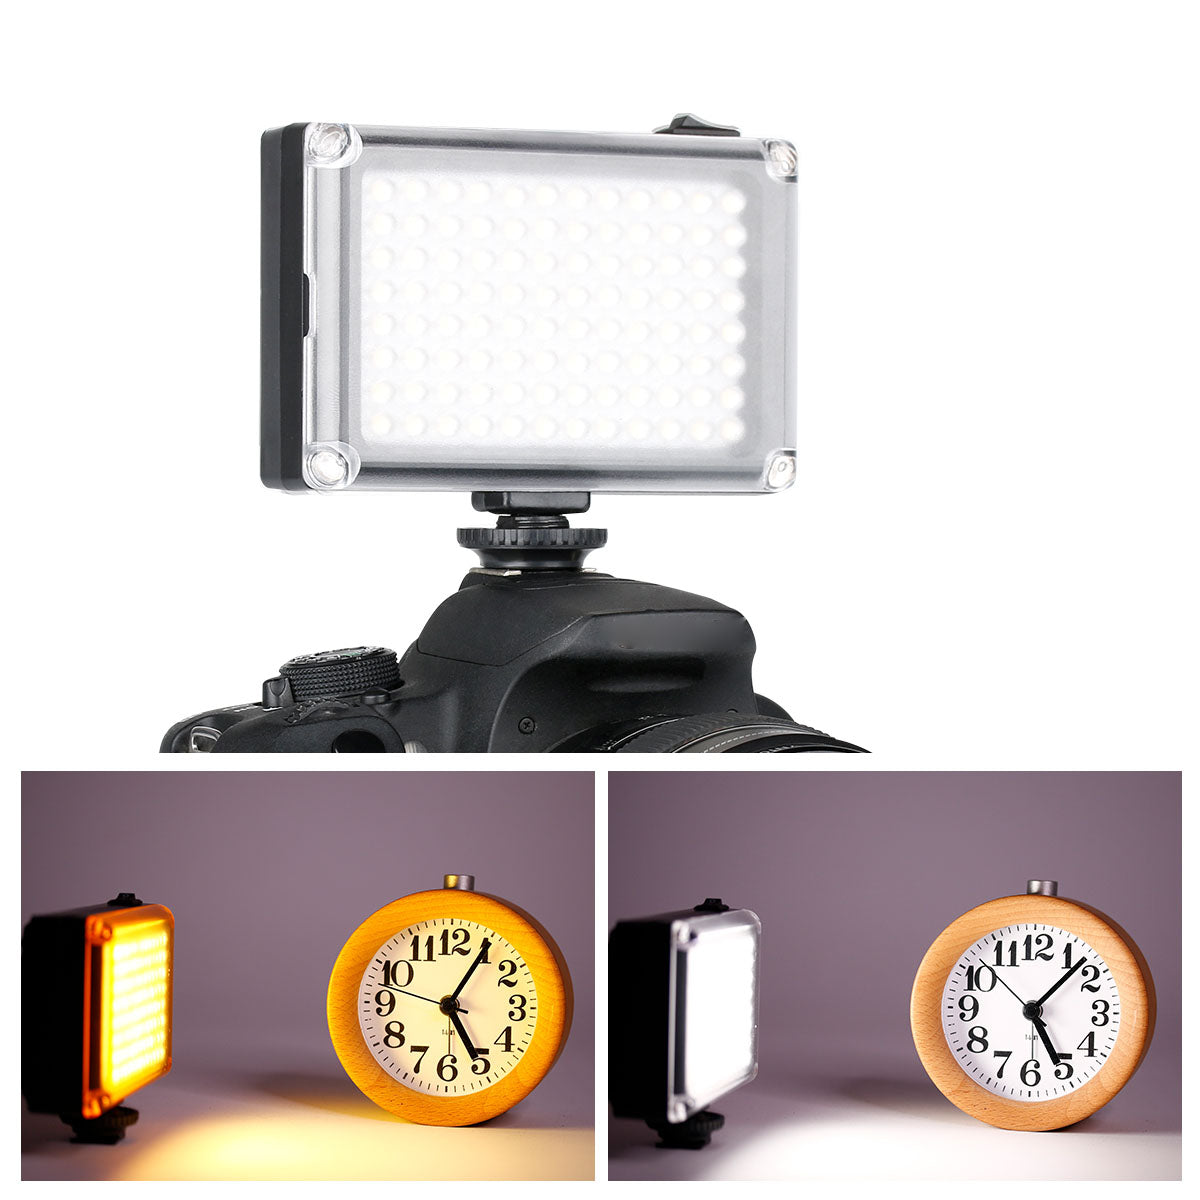 Uniqkart 96 LED Video Light Dimmable Bi-color Temperature Photographic Lighting for Youtube Live Streaming